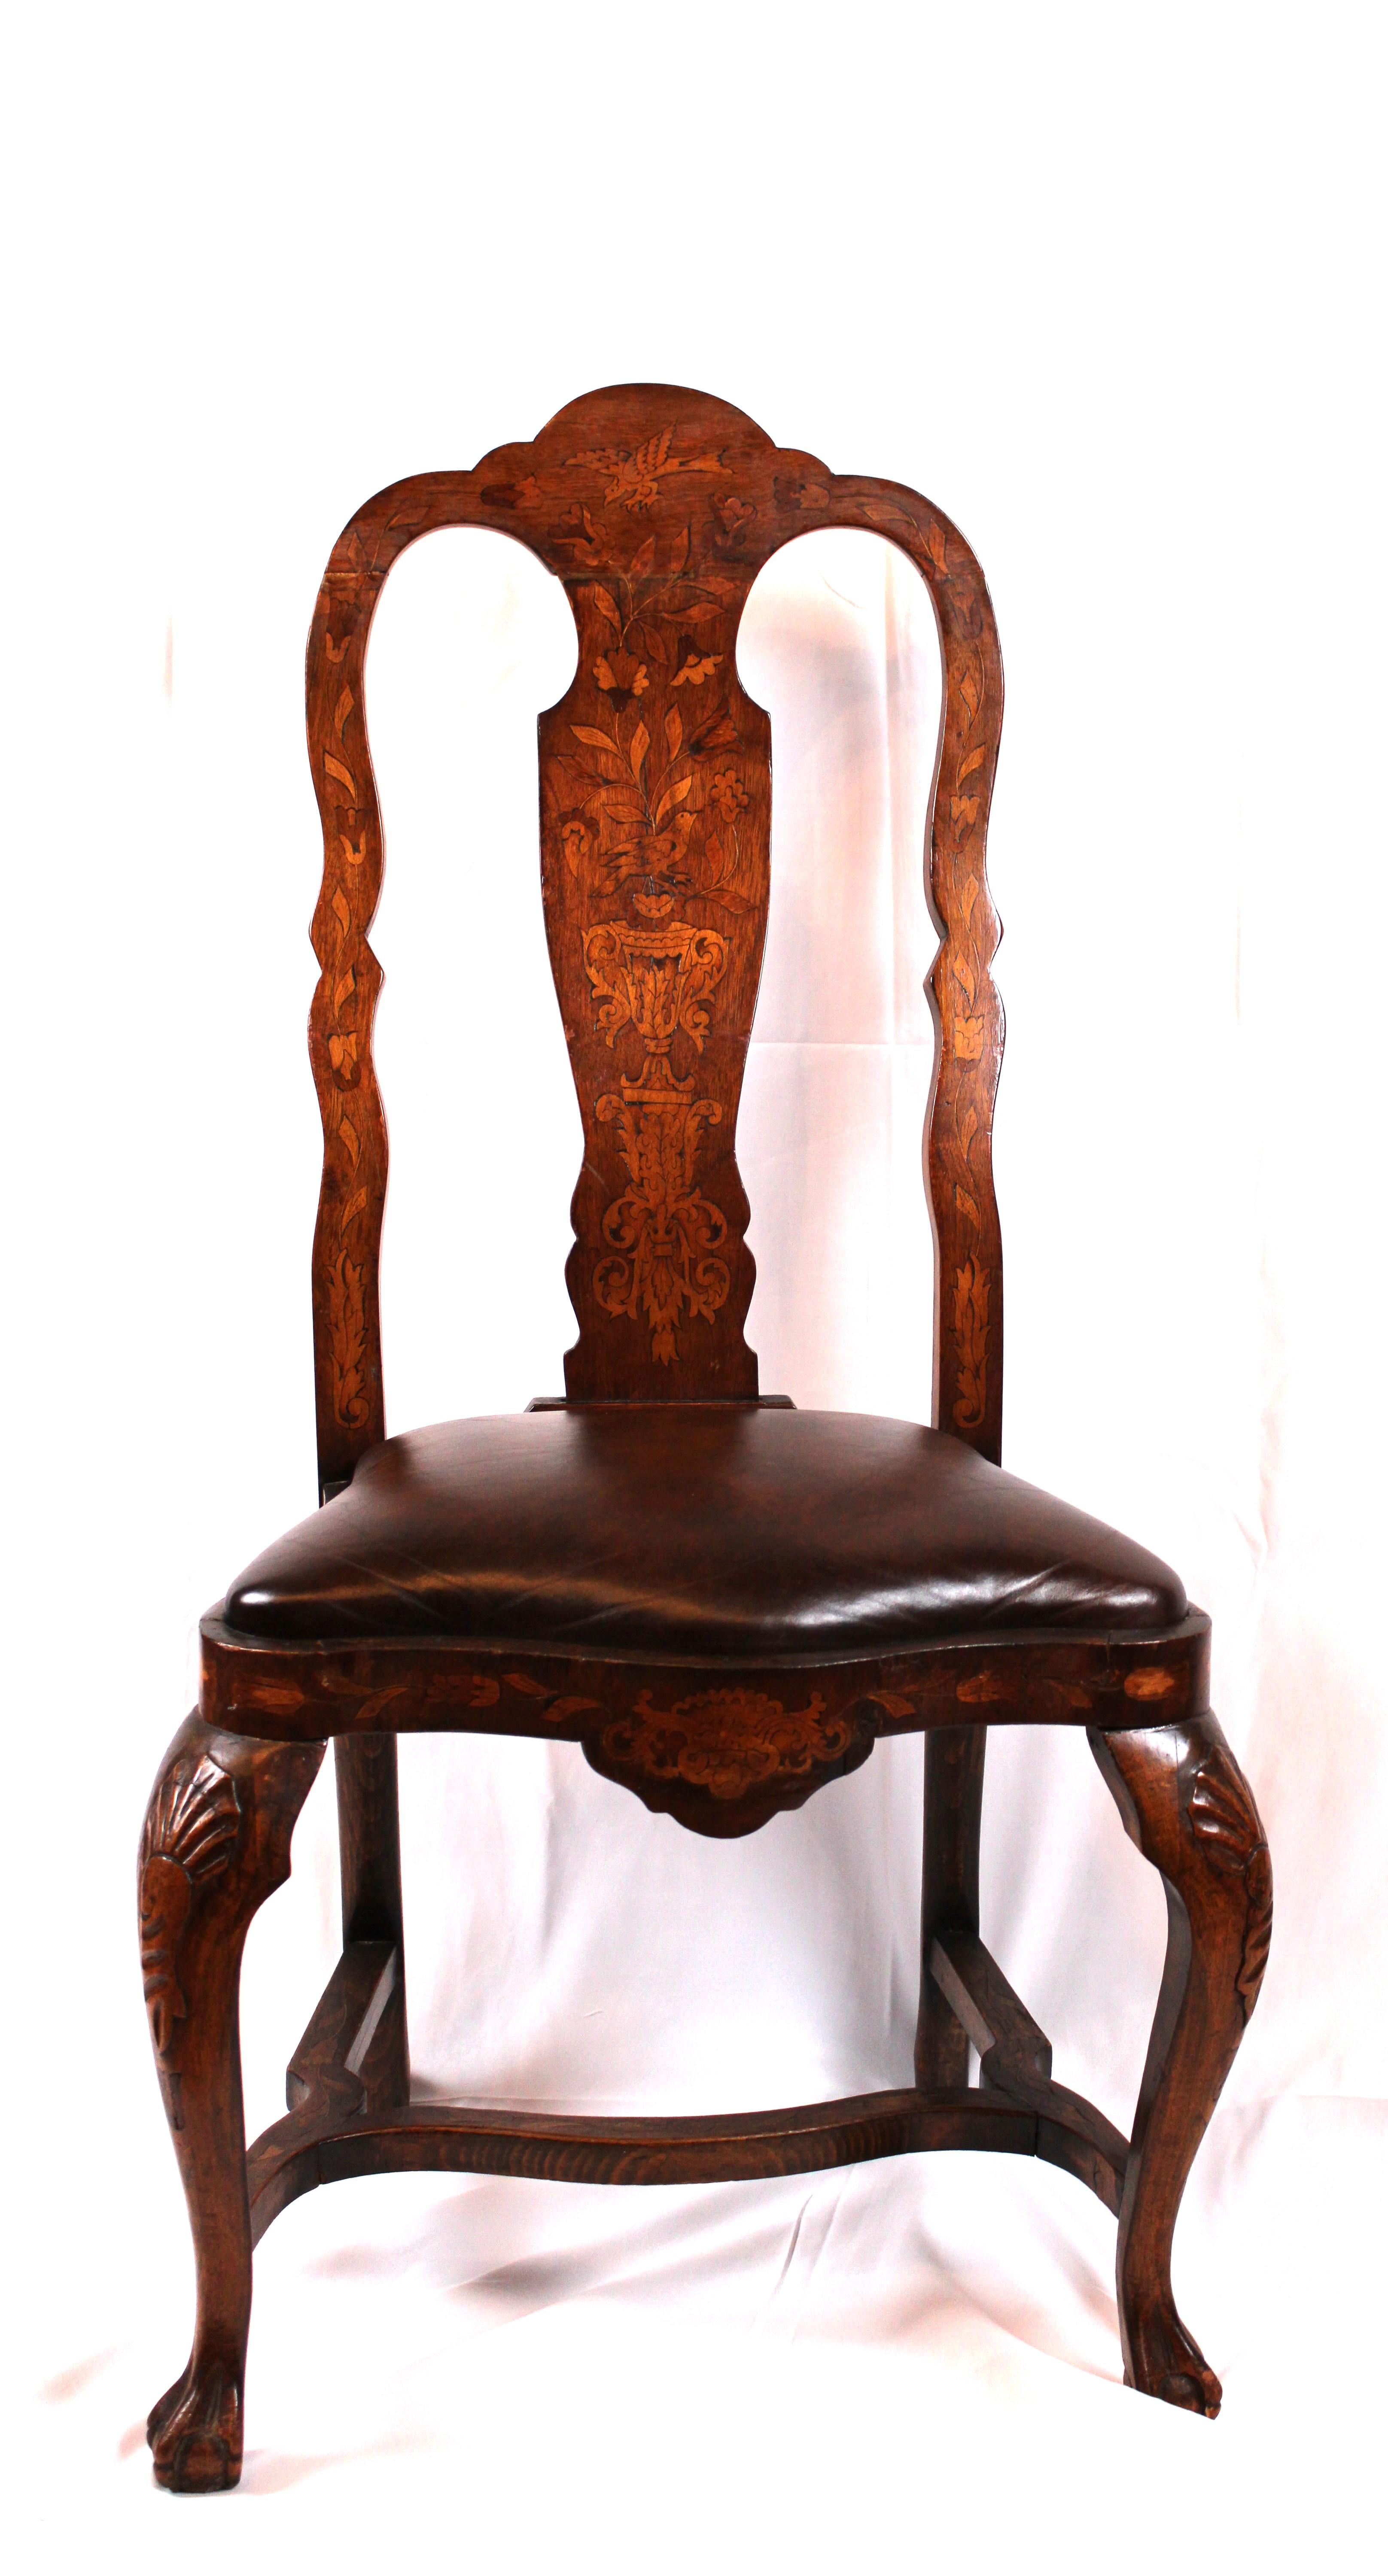 Mahogany Elegance in Wood: 19th-Century Dutch Marquetry Dining Chairs (Set of 6) For Sale